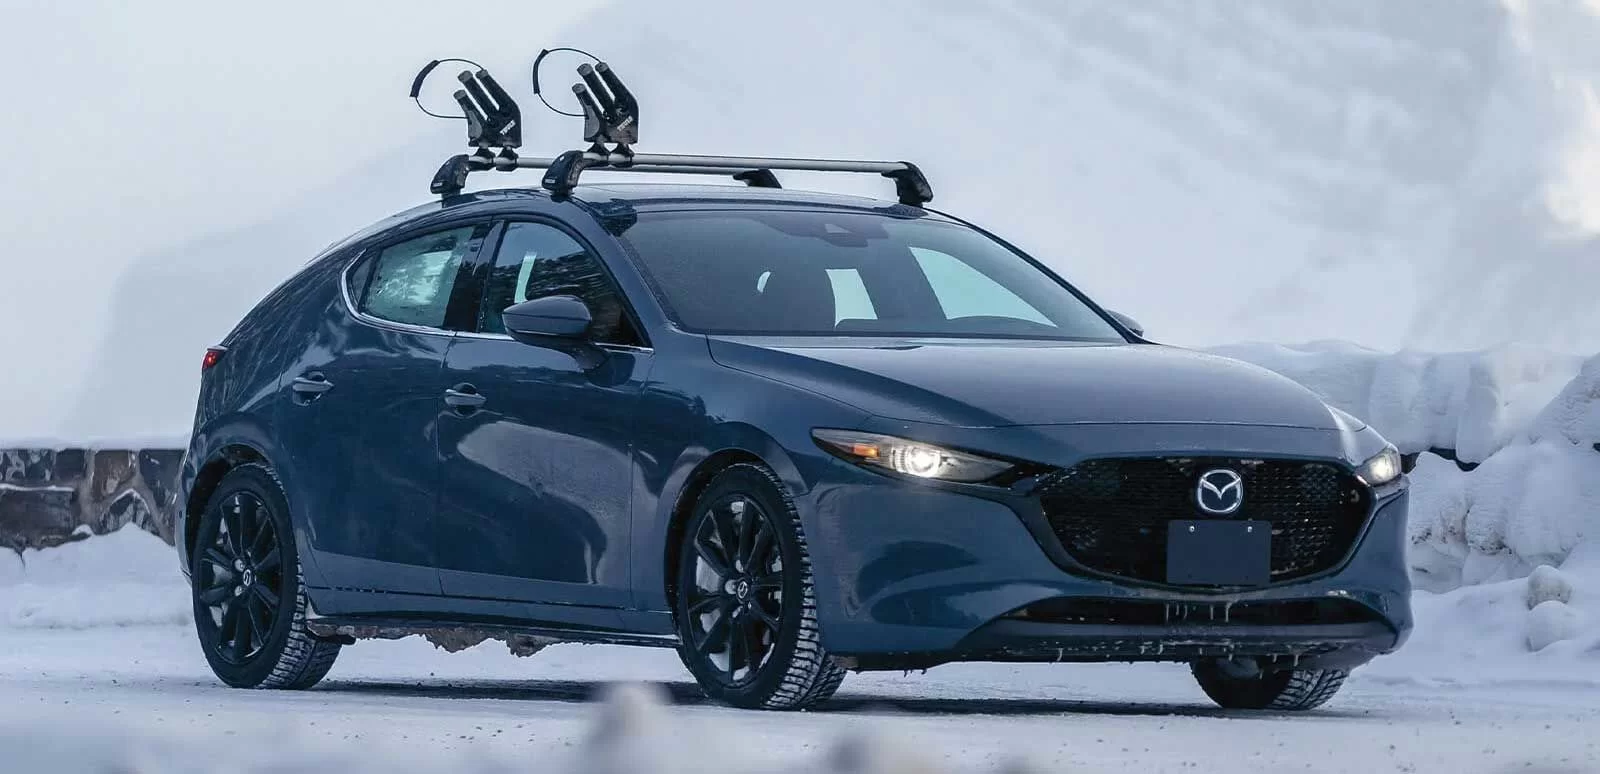 Mazda’s winter-ready features: keeping you warm and safe